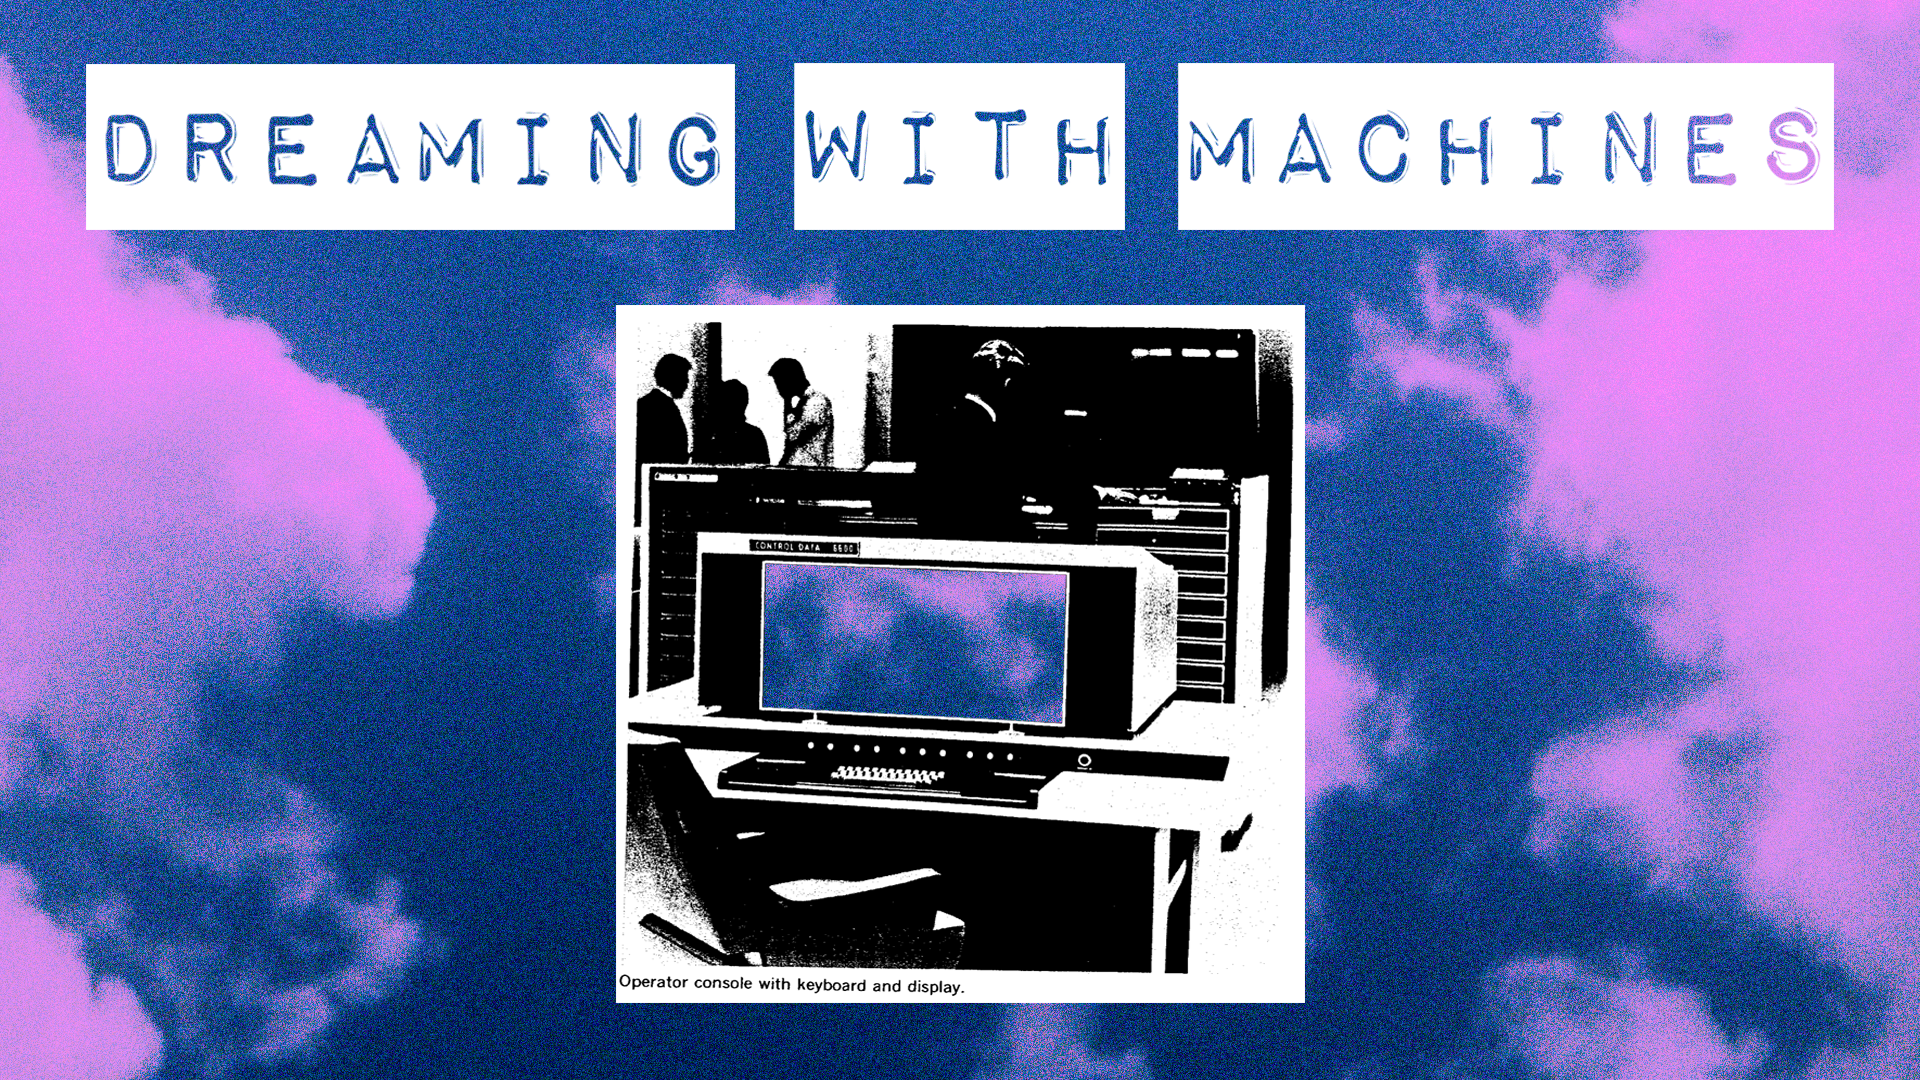 Dreaming With Machines Image